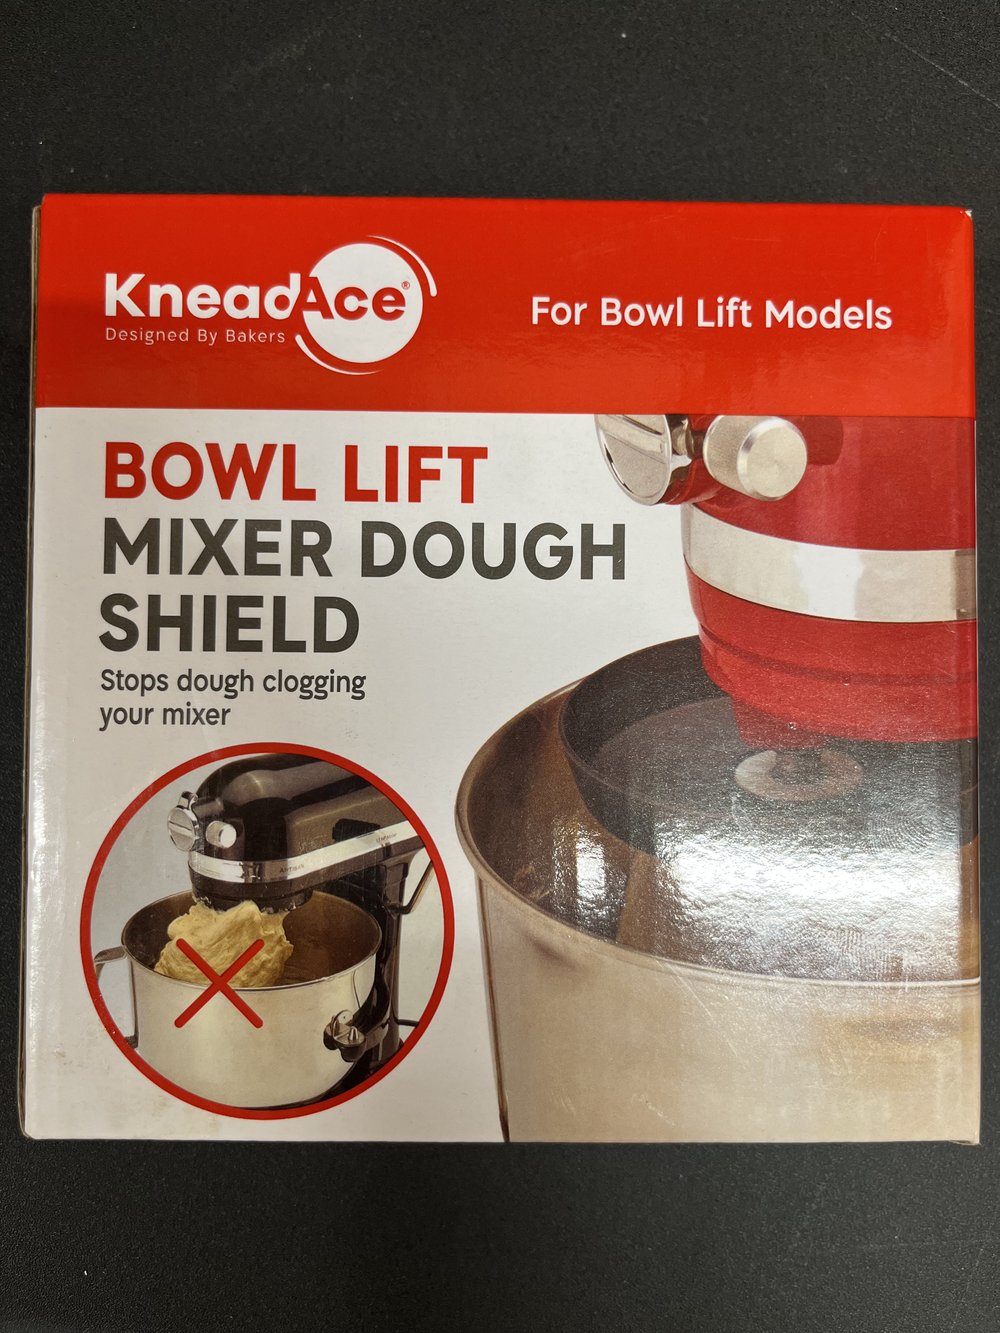  KneadAce Dough Hook Shield For Kitchen Aid - Prevents